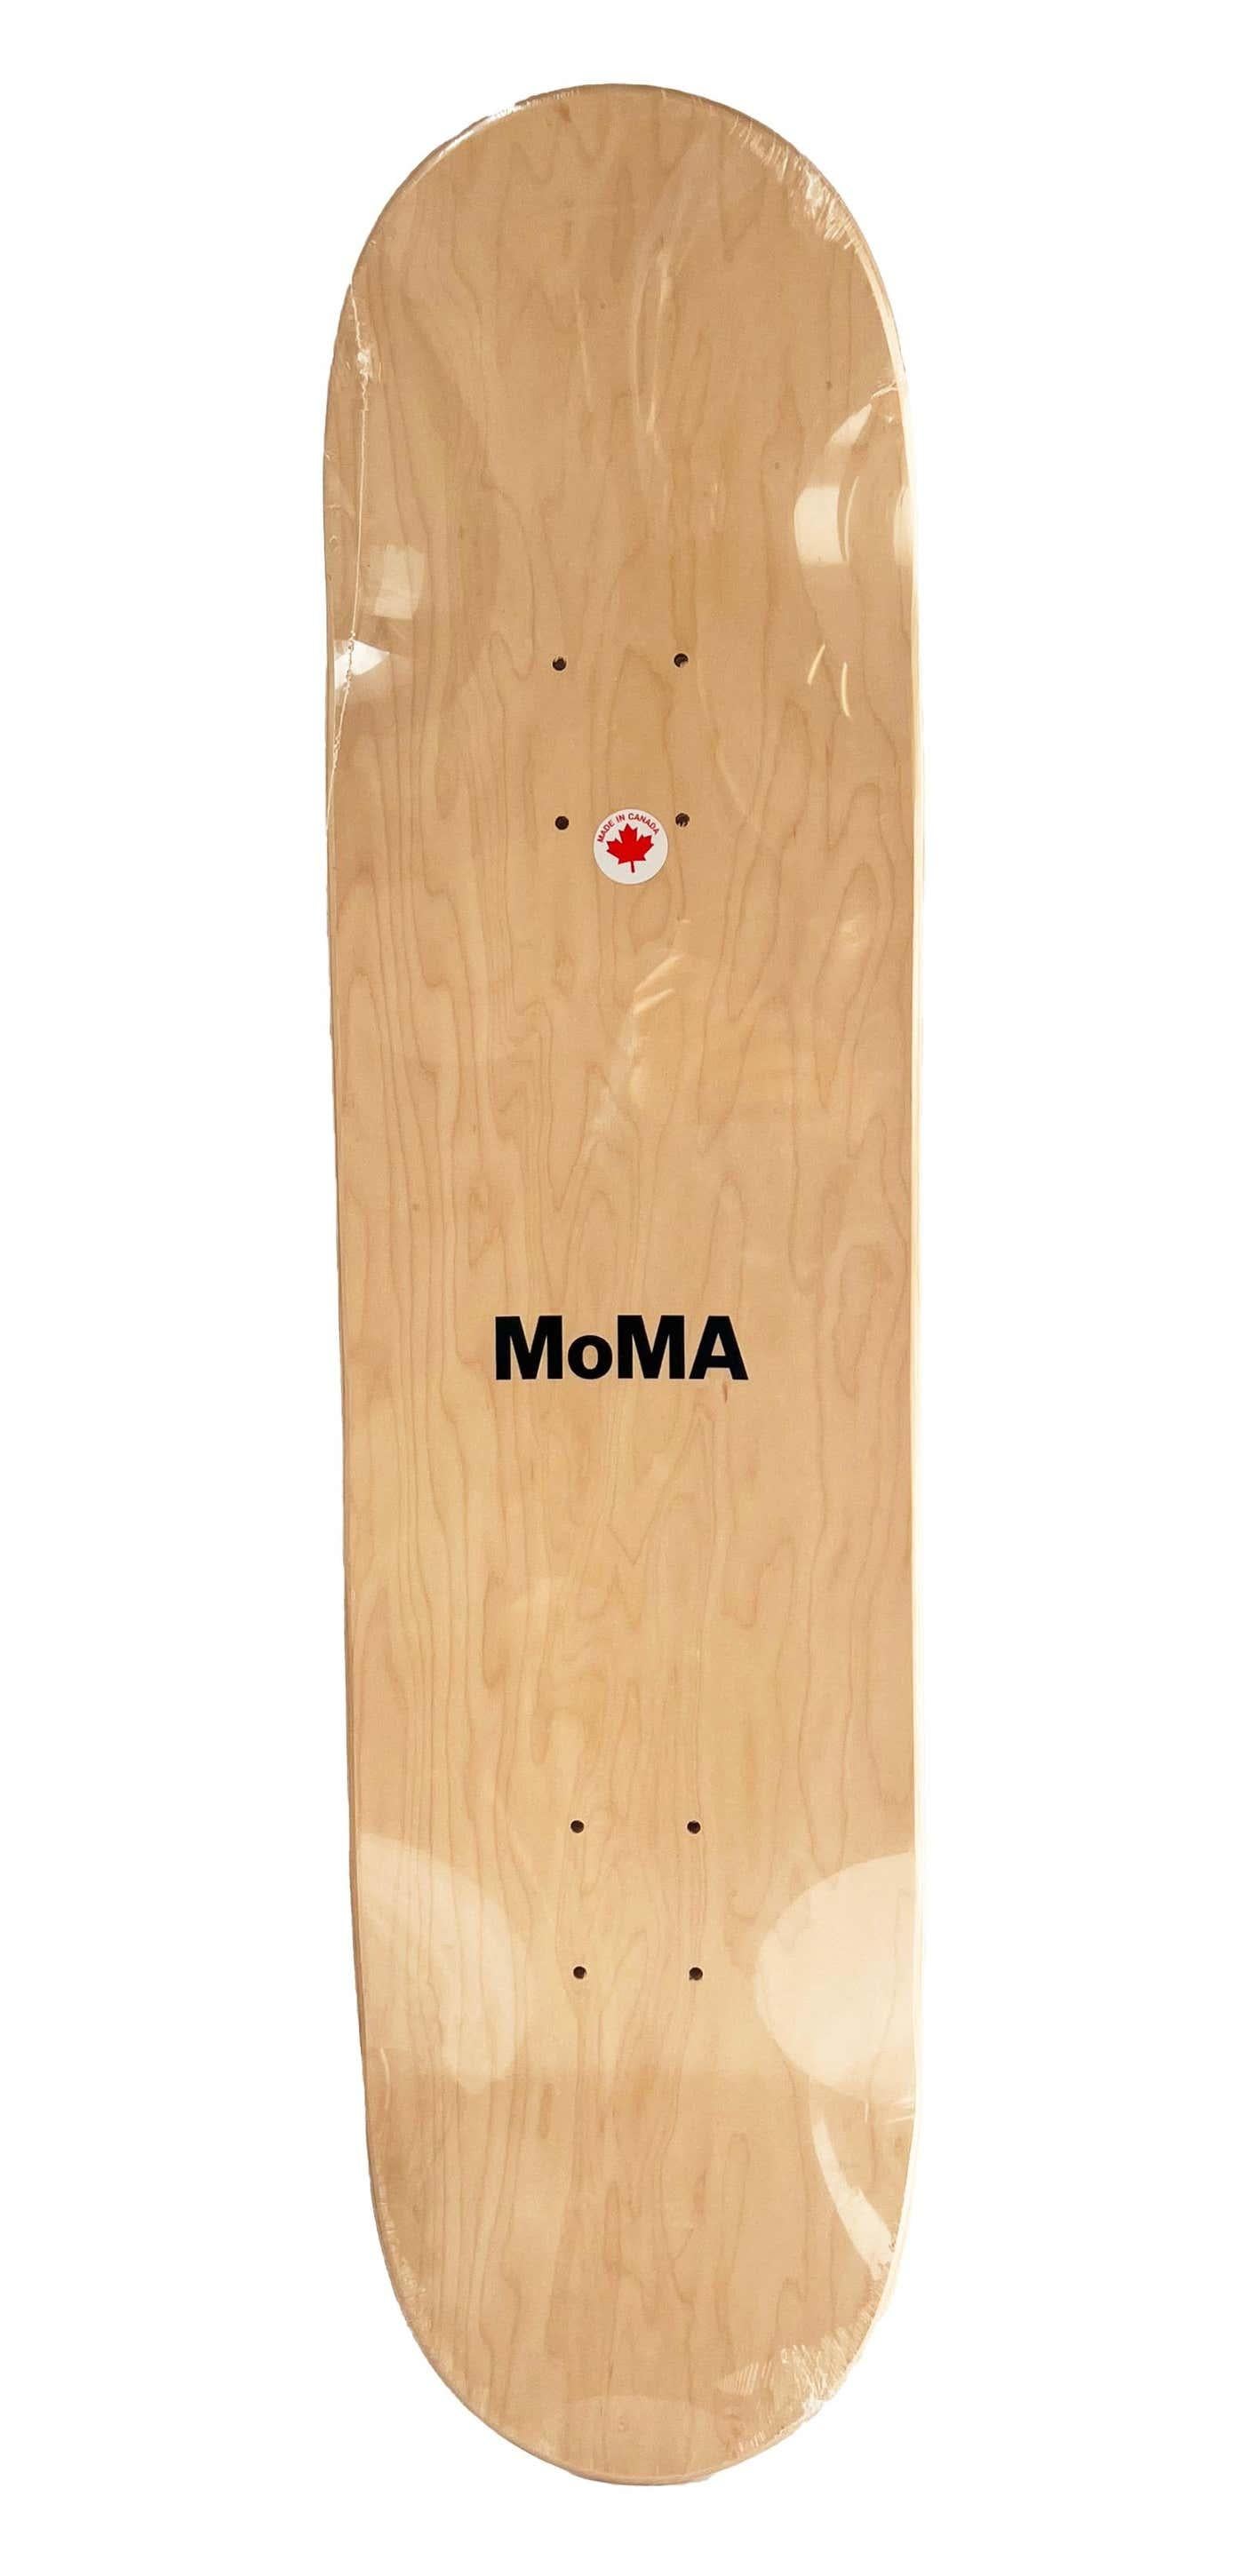 Yoshitomo Nara MoMA Skateboard Decks (complete set of 2 works):
These Yoshitomo Nara skateboard decks were published MoMa New York and created in 2017 under the supervision of Nara featuring his artworks, 'Welcome Girl' (left) and 'Solid Fist'